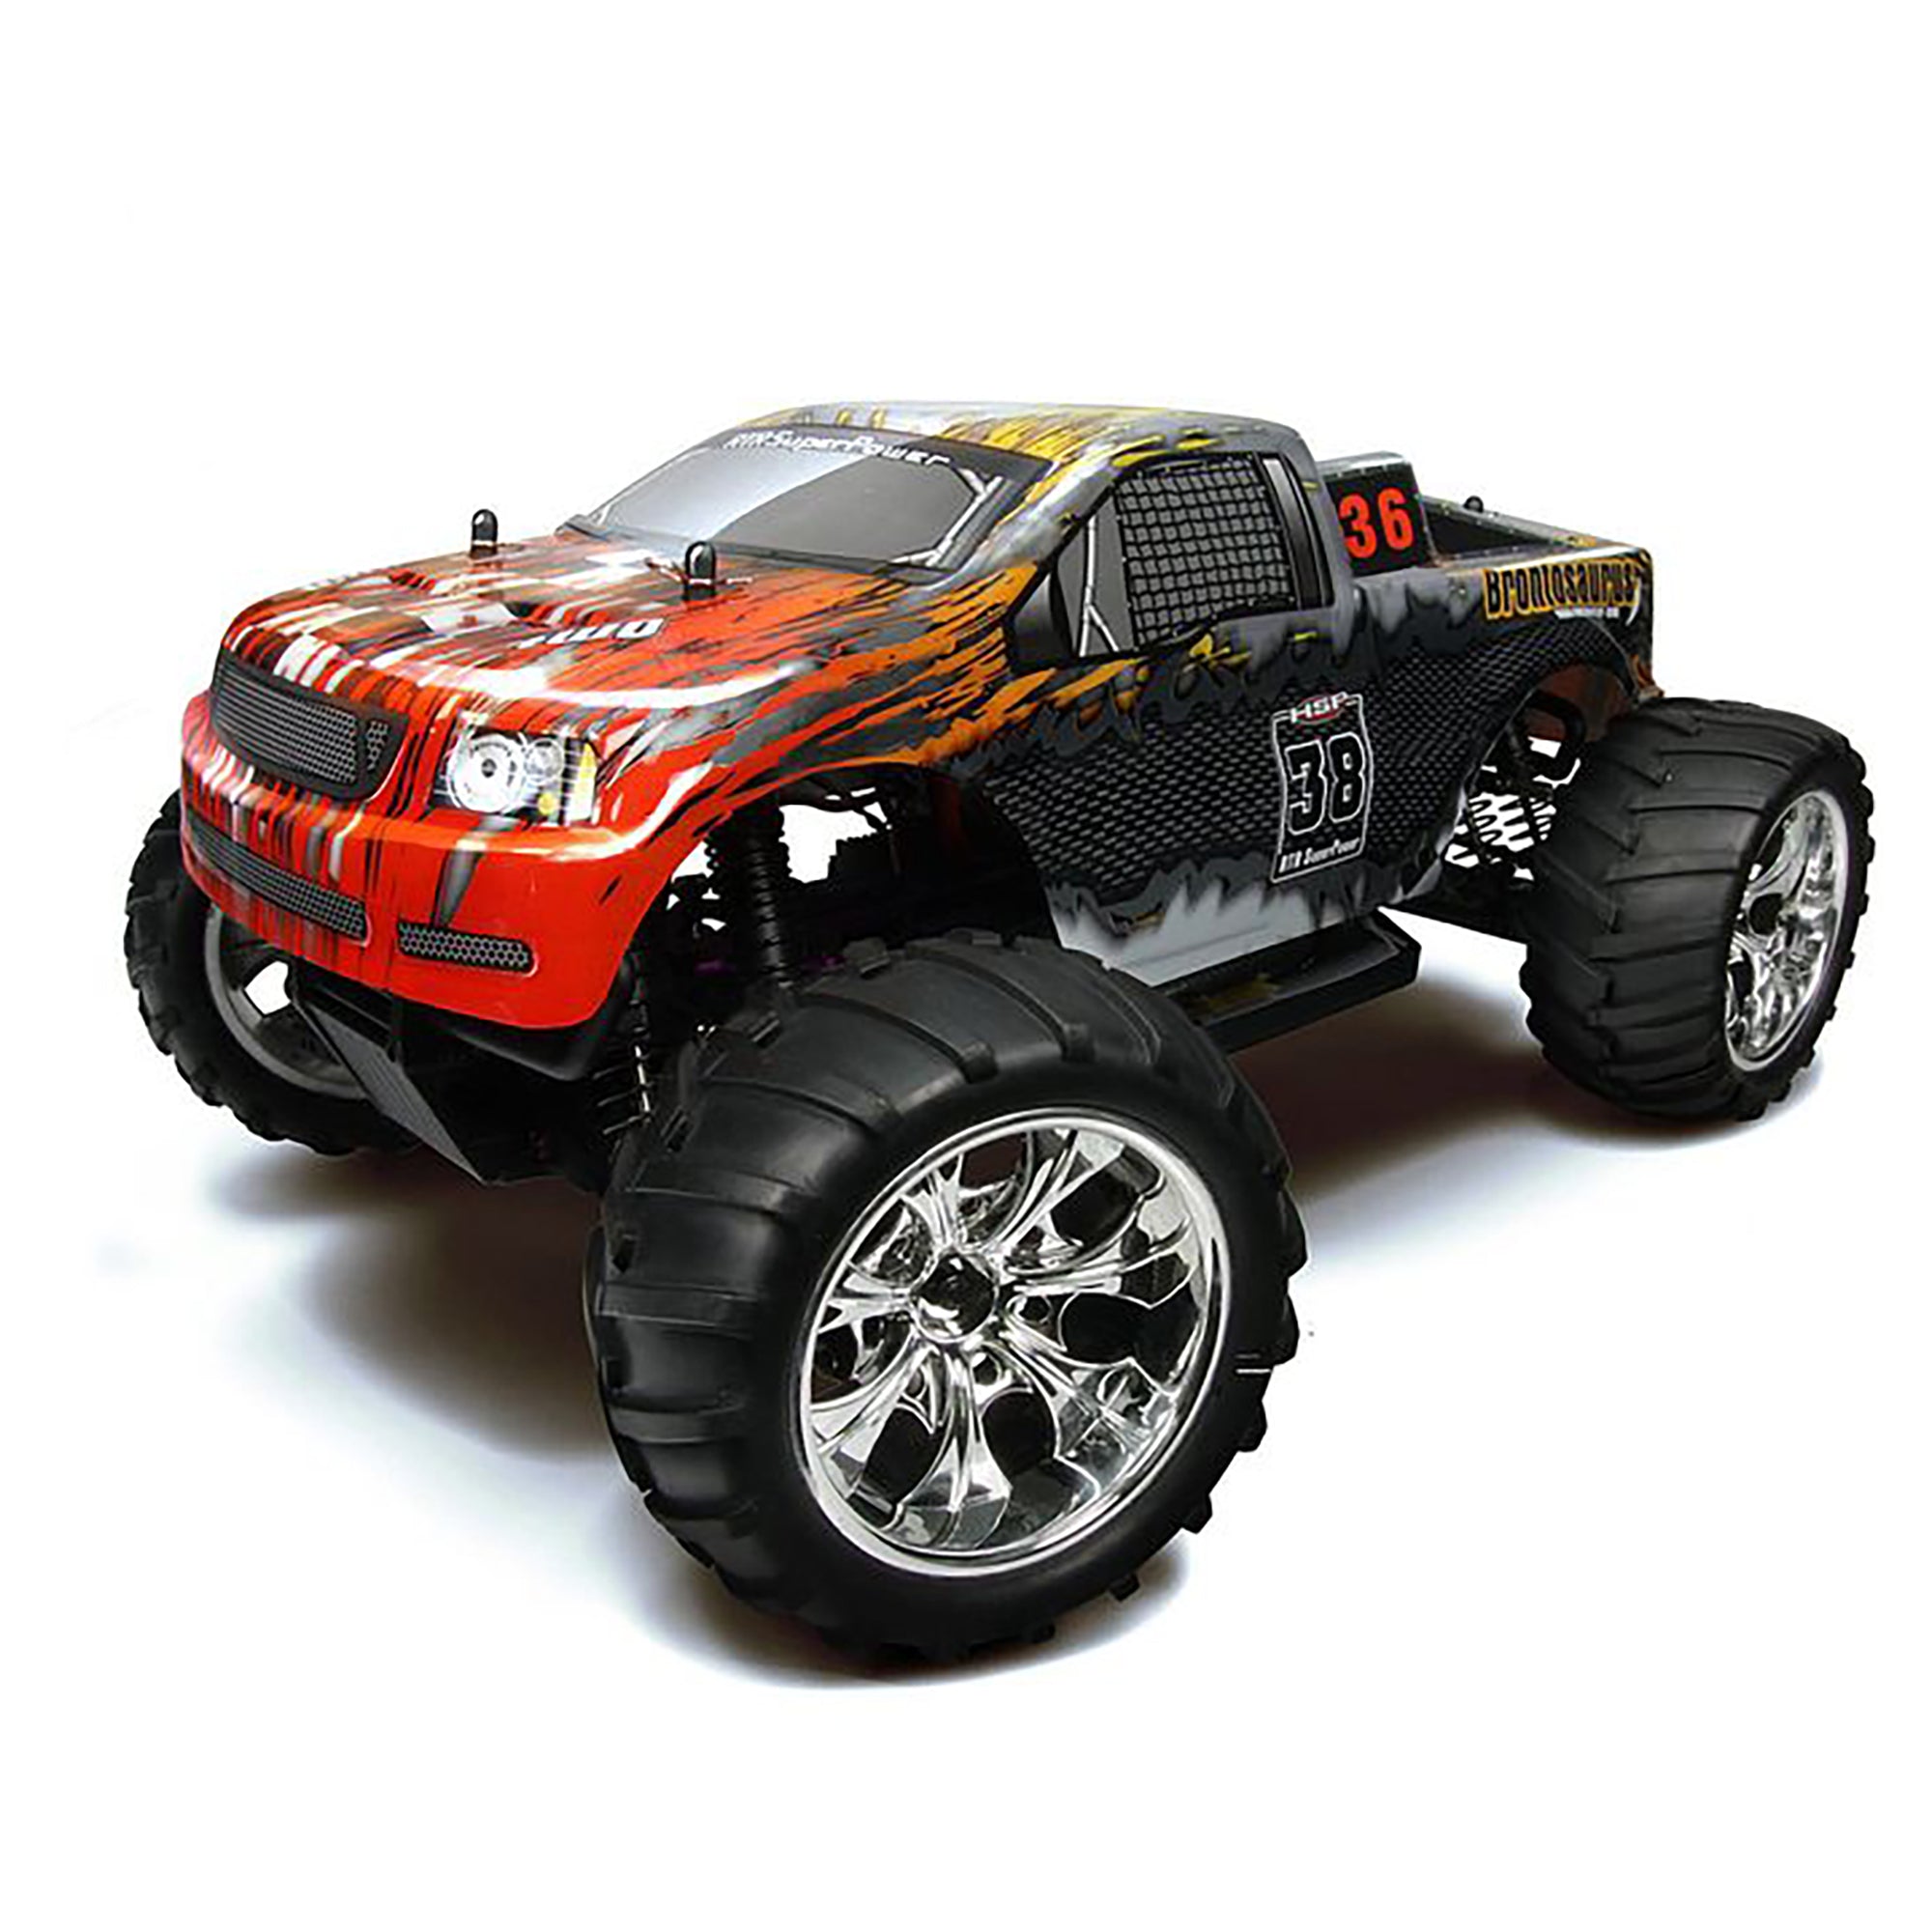 HSP Racing 94111-88043 2.4Ghz Electric 4WD Off Road 1/10 Scale RC Monster Truck